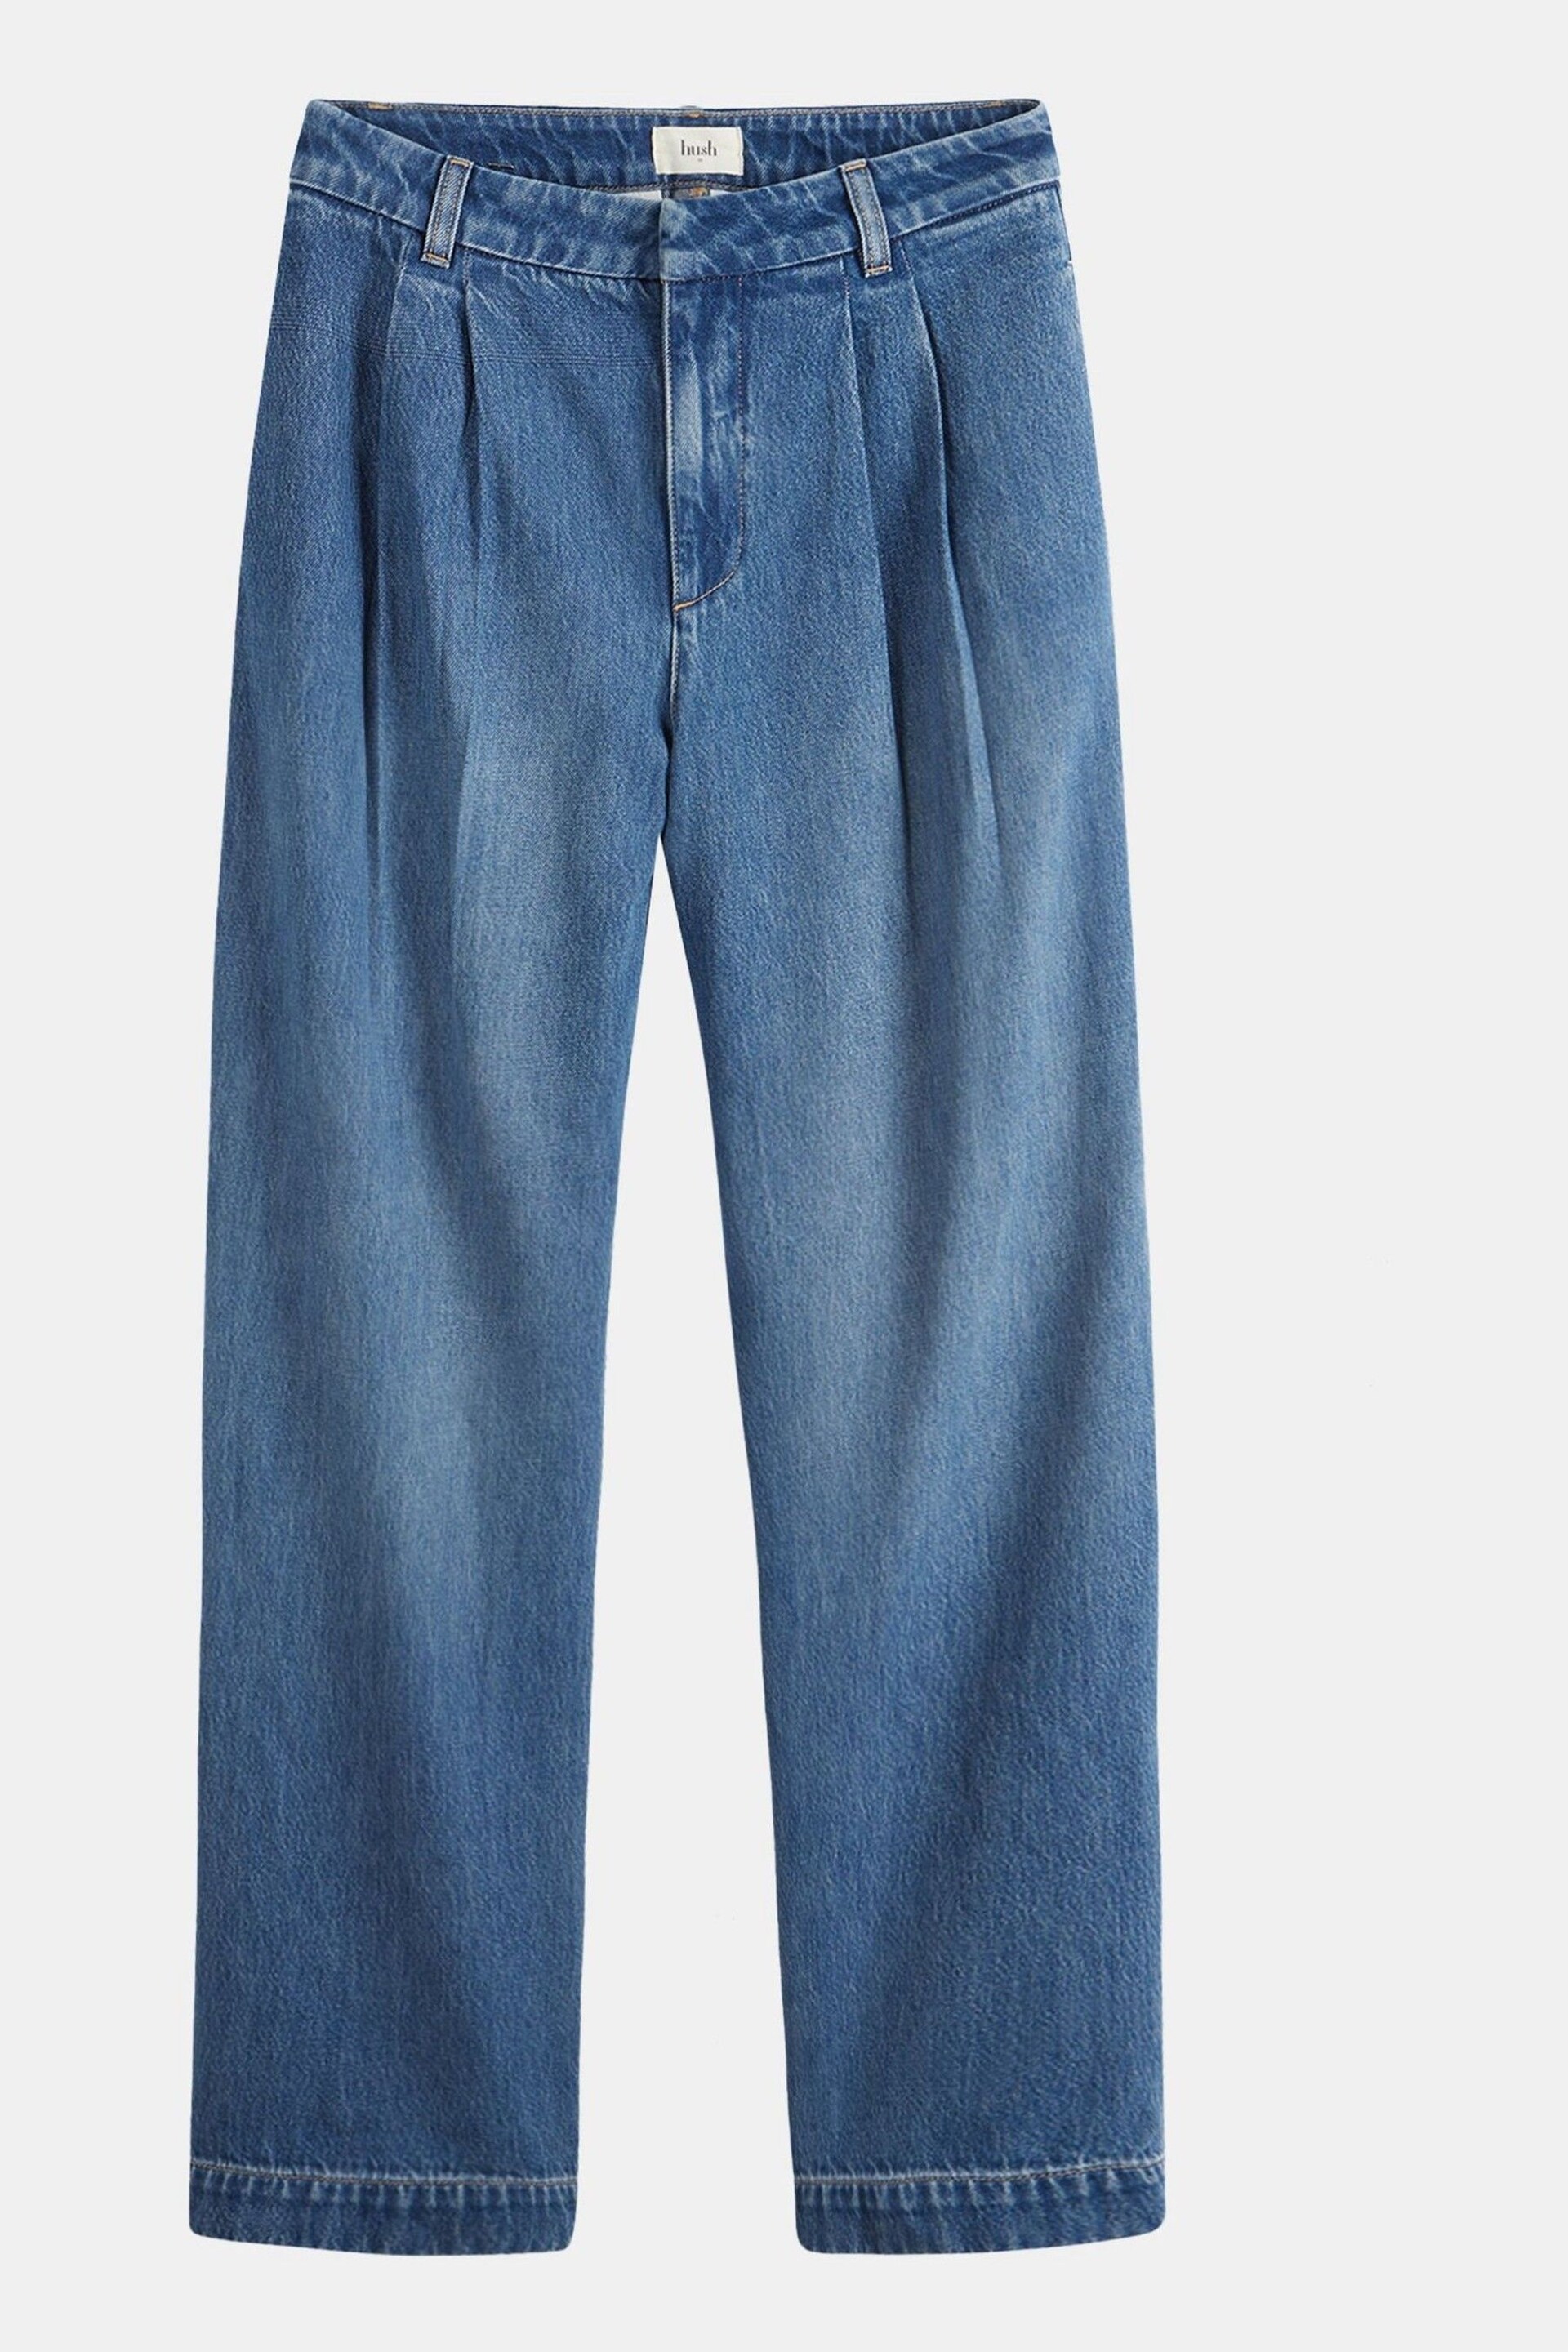 Hush Blue Lya Pleated Wide-Leg Jeans - Image 5 of 5